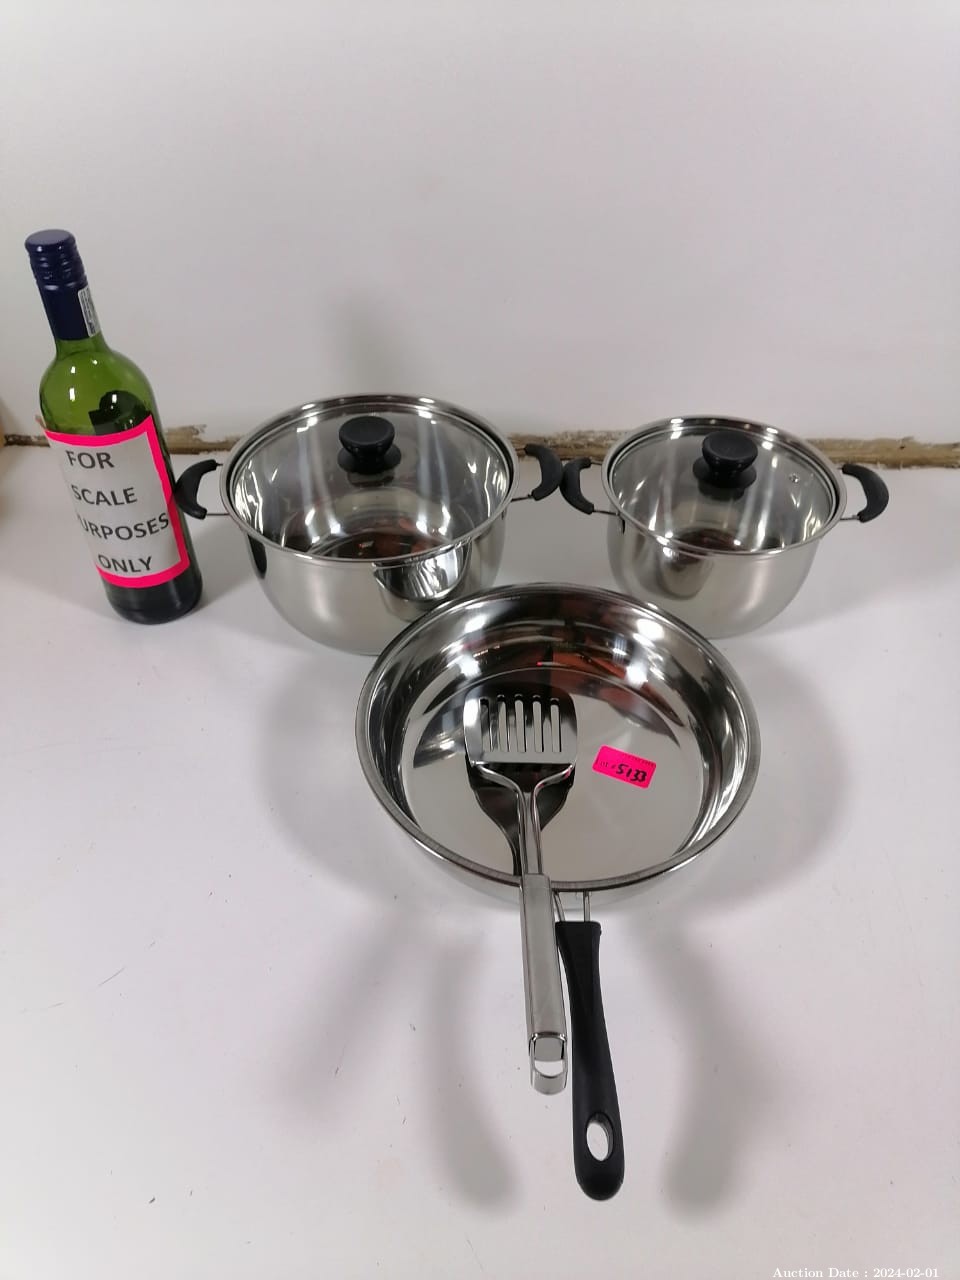 5133 - Stainless Steel Kitchenware - Pots, Frying Pan and Shovel